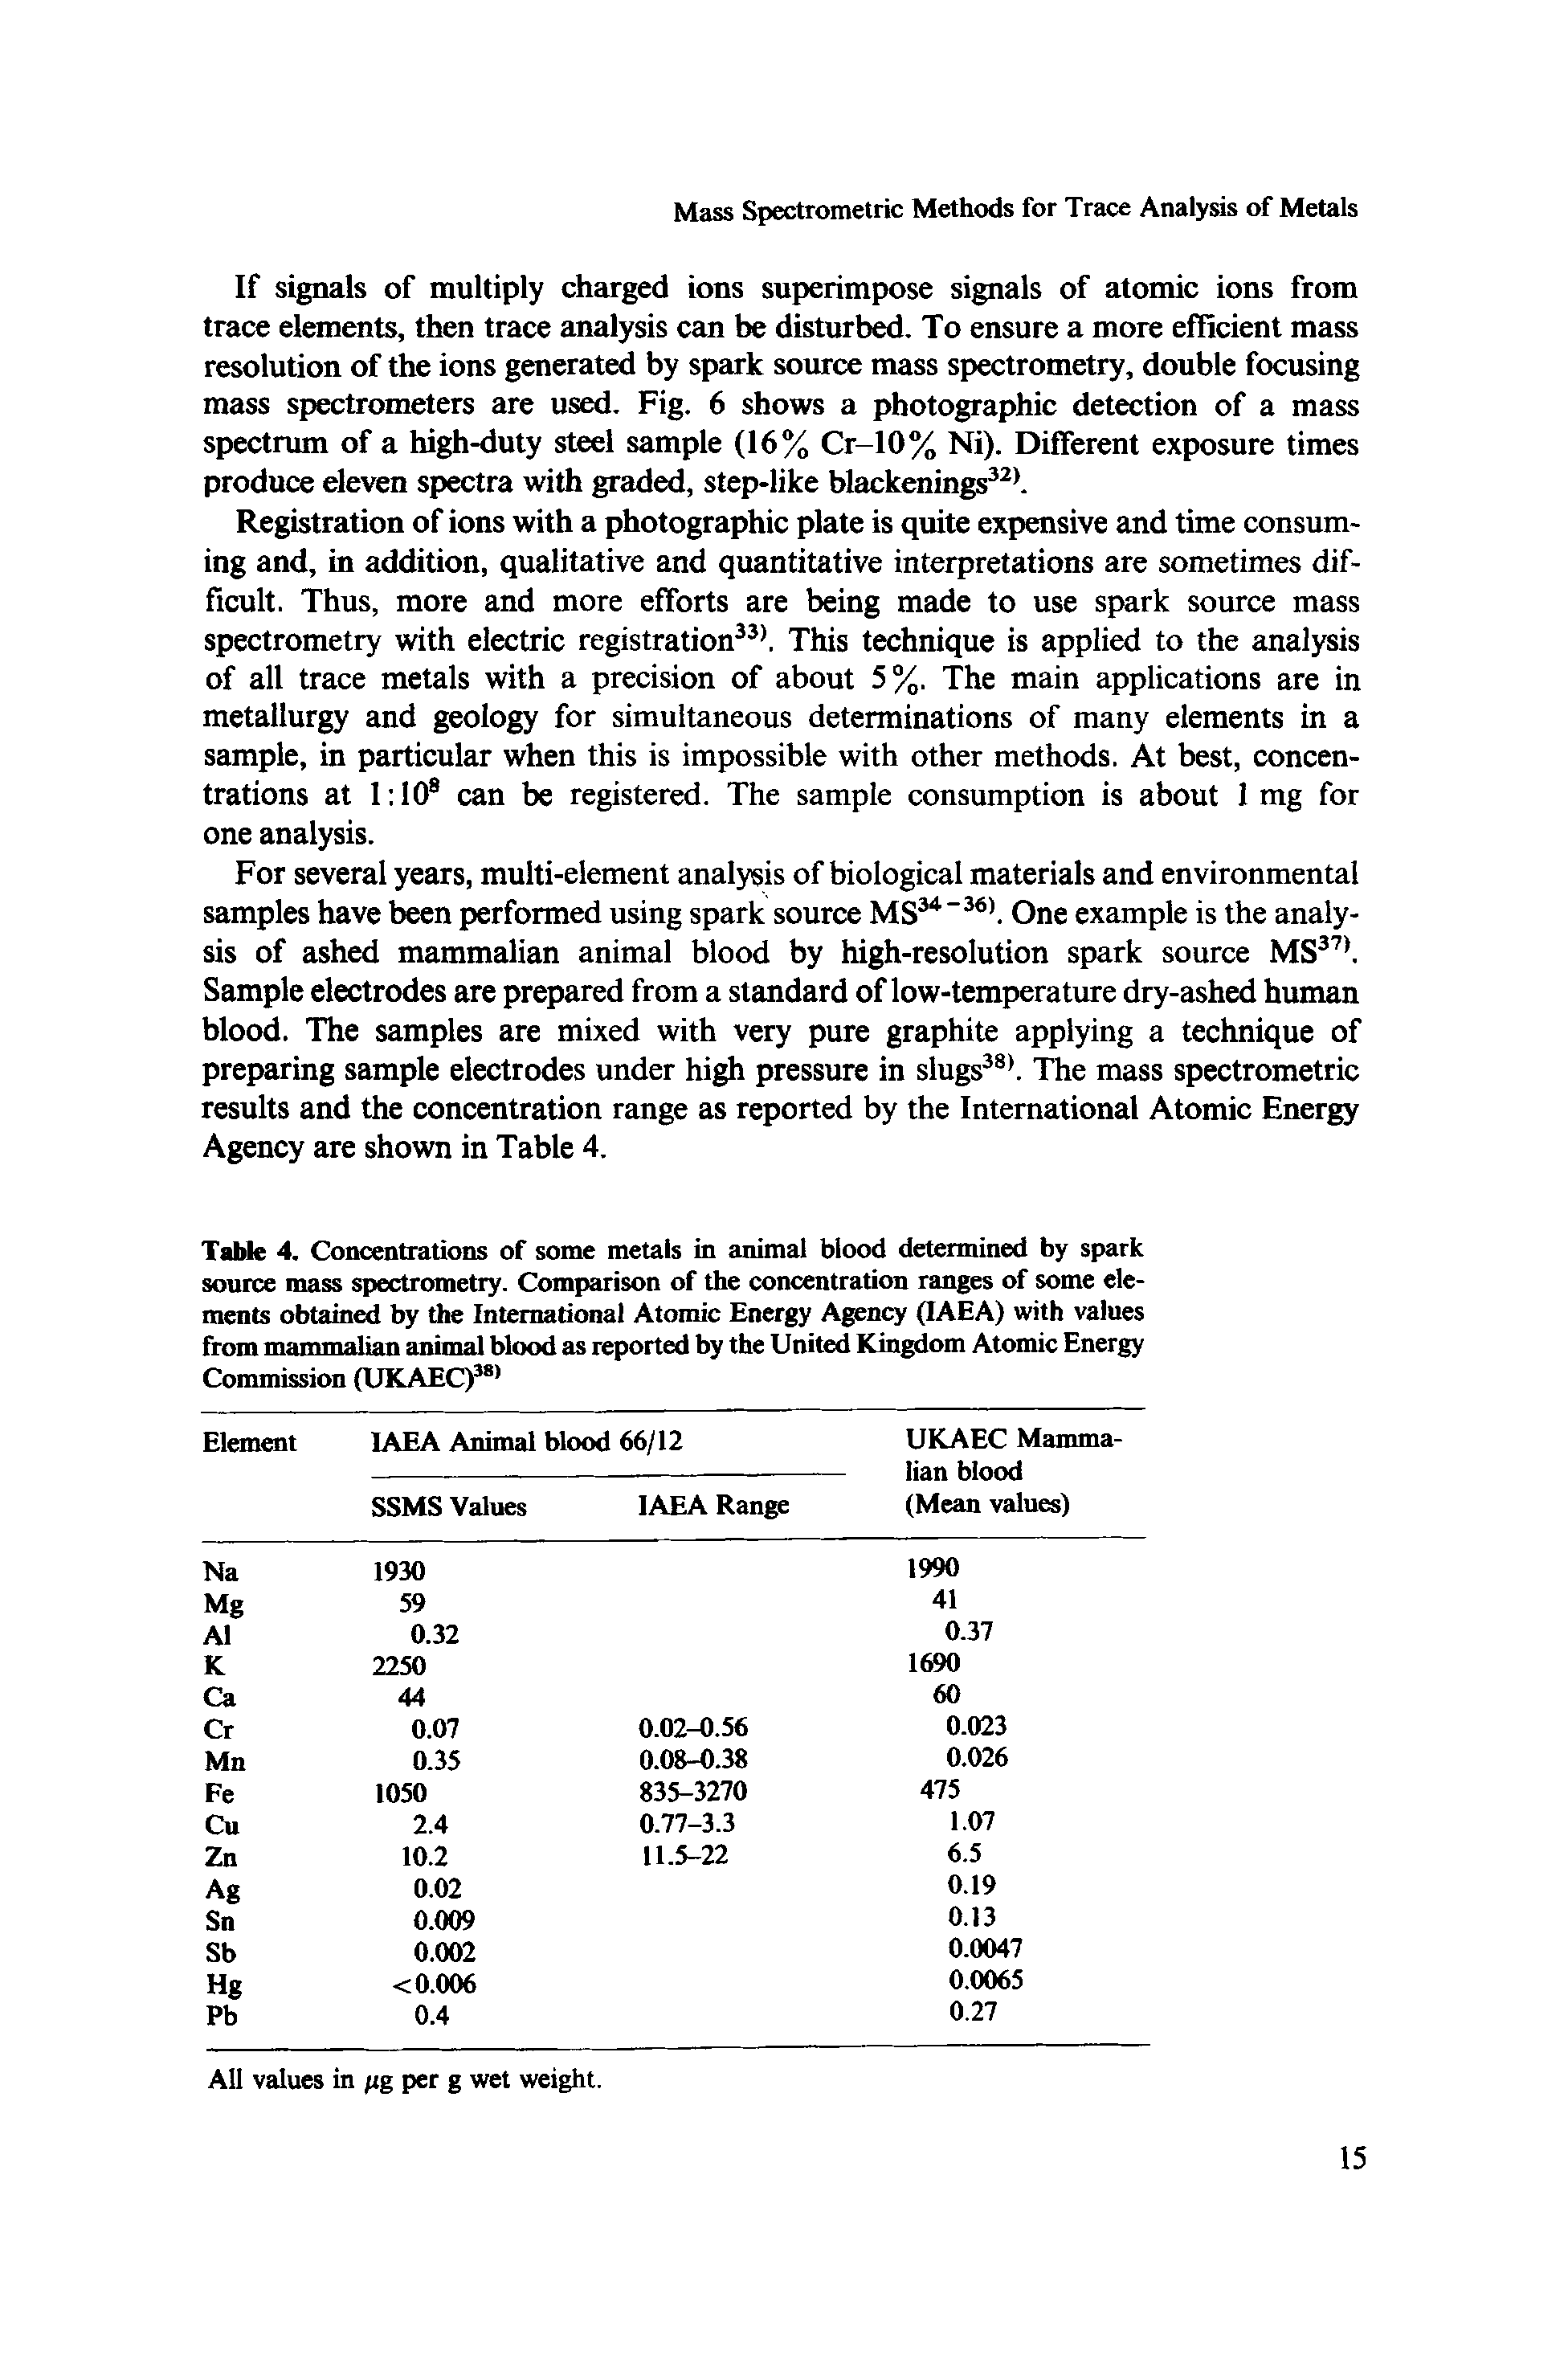 Table 4. Concentrations of some metals in animal blood determined by spark source mass spectrometry. Comparison of the concentration ranges of some elements obtain by the International Atomic Energy Agency (IAEA) with values from mammalian animal blood as reported by the United Kingdom Atomic Energy Commission (UKAEC) ...